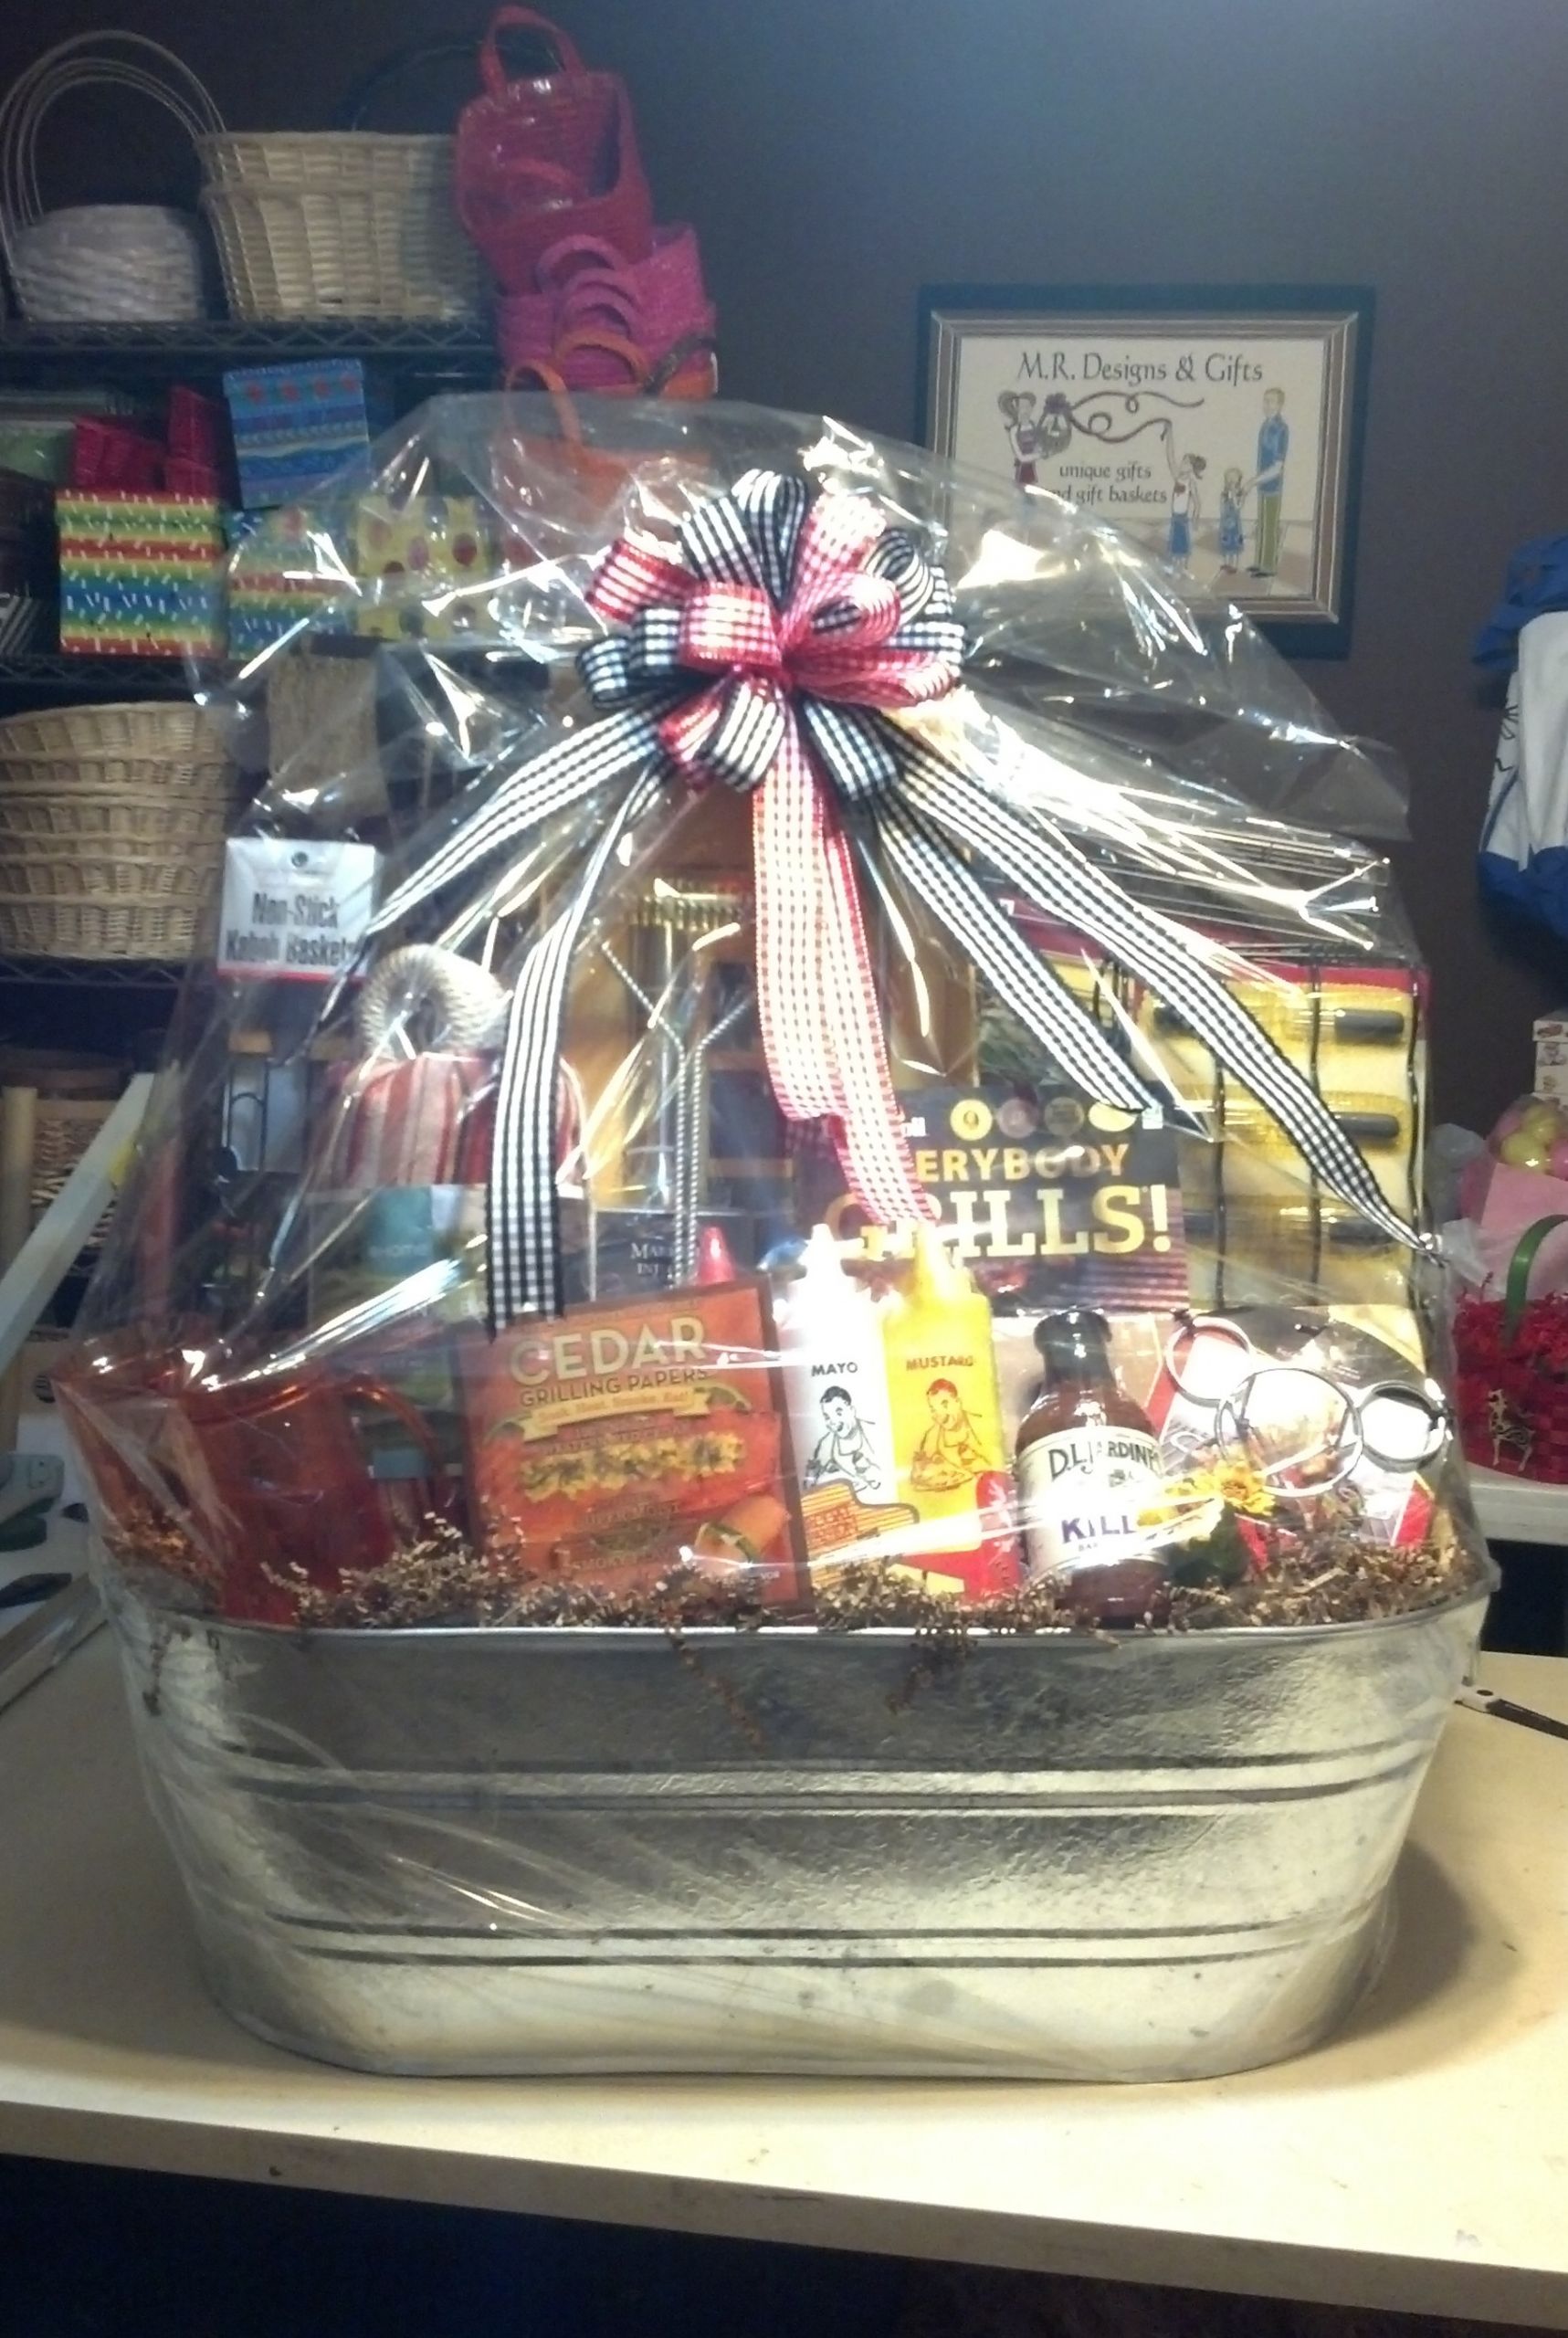 Silent Auction Gift Basket Ideas
 Special Event and Silent Auction Gift Basket Ideas by M R